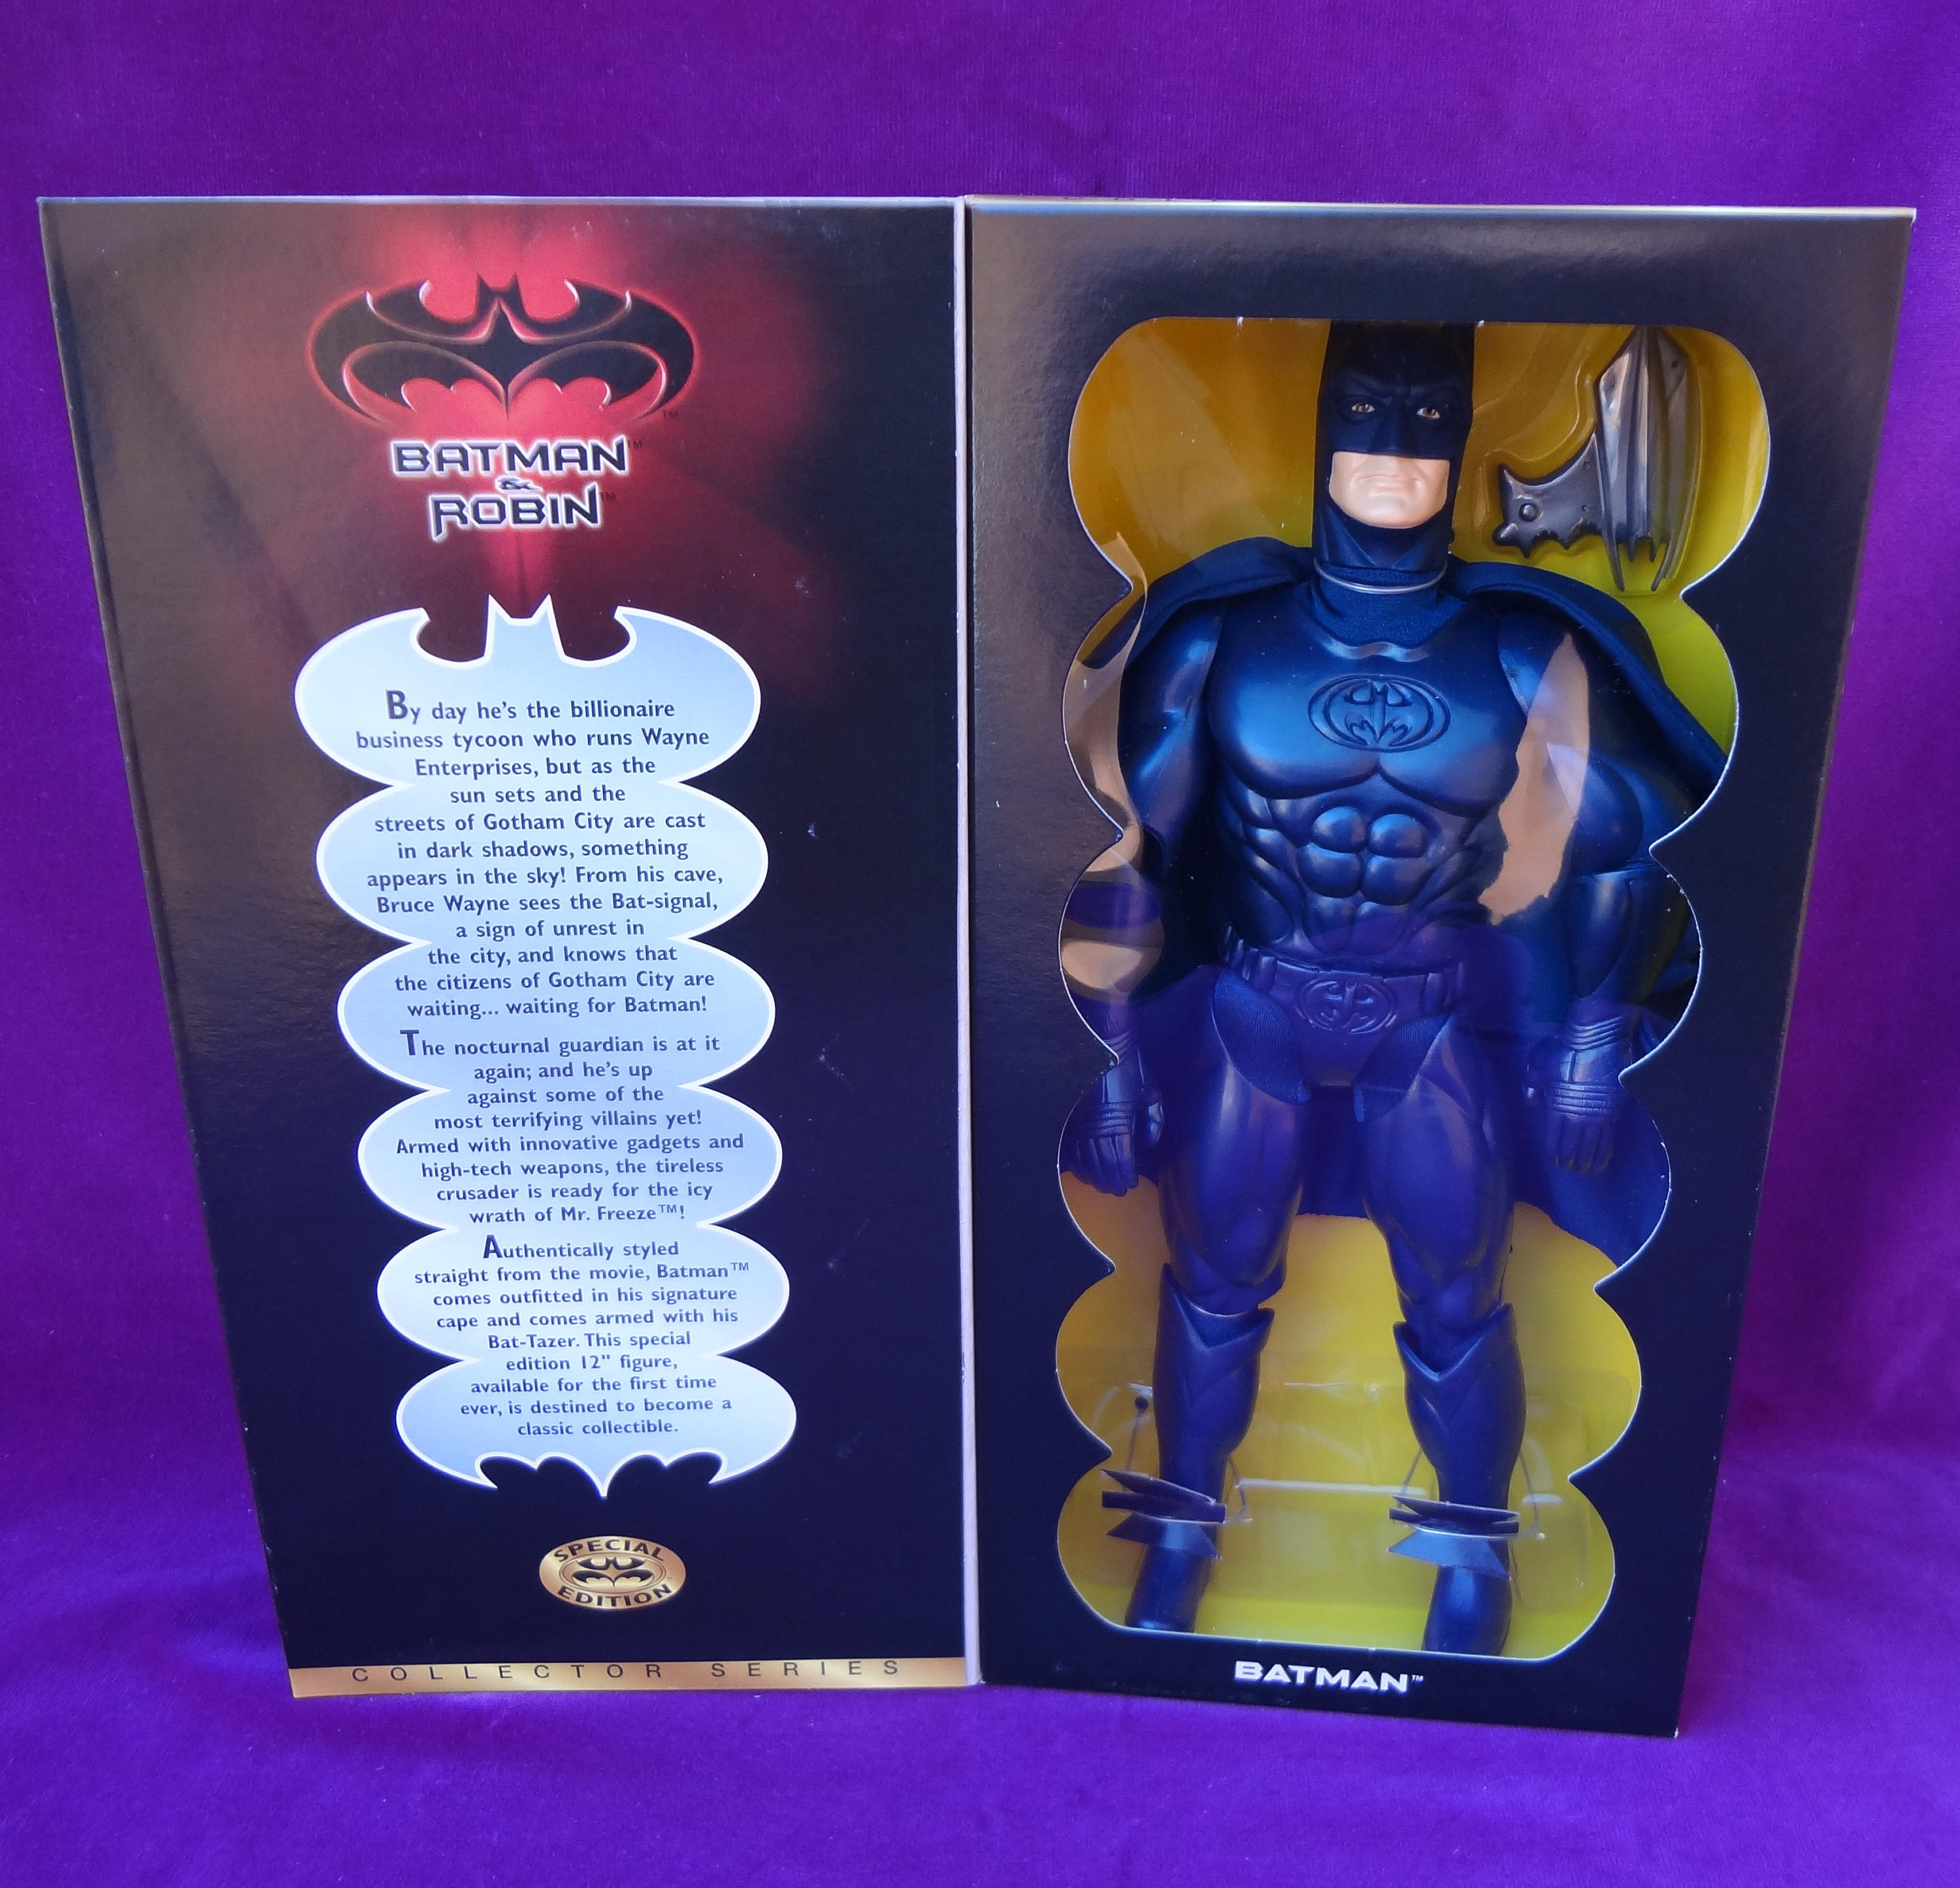 Batman & Robin "robin" 12" Figure Collectors Series by Kenner 1997 for sale online 